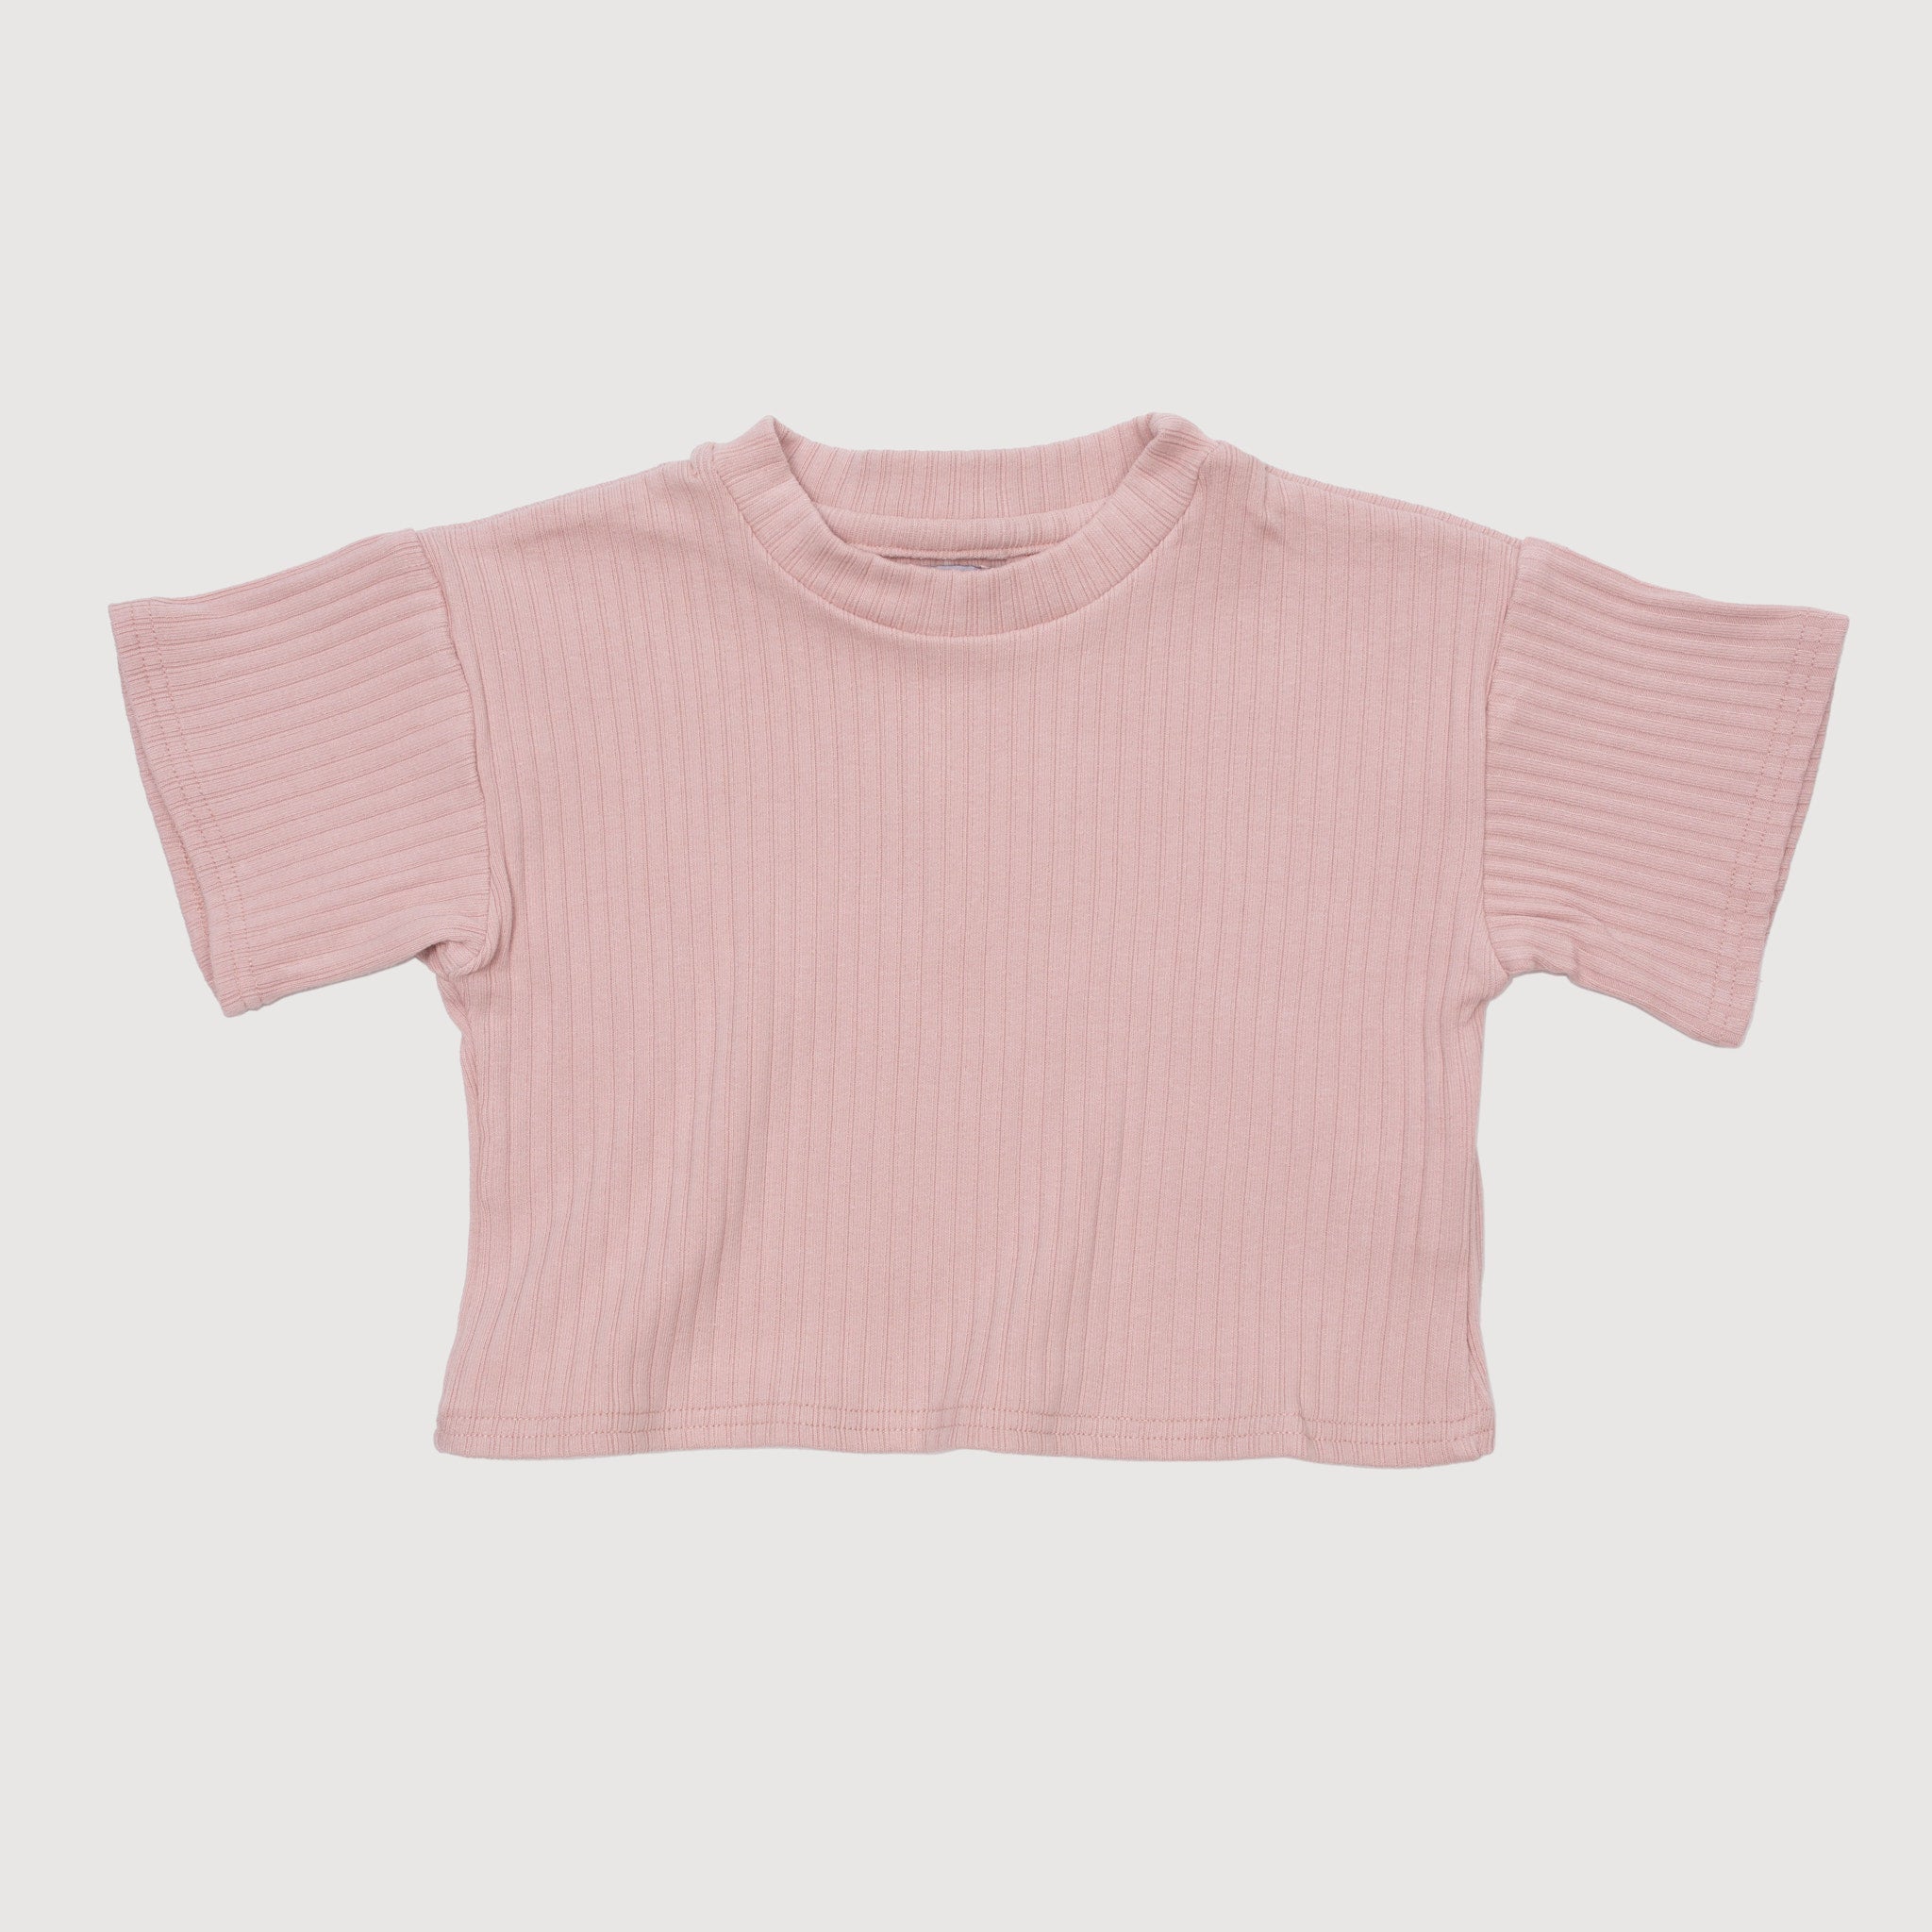 Wide Ribbed Short Sleeve Boxy Tee - Bisque bel & bow